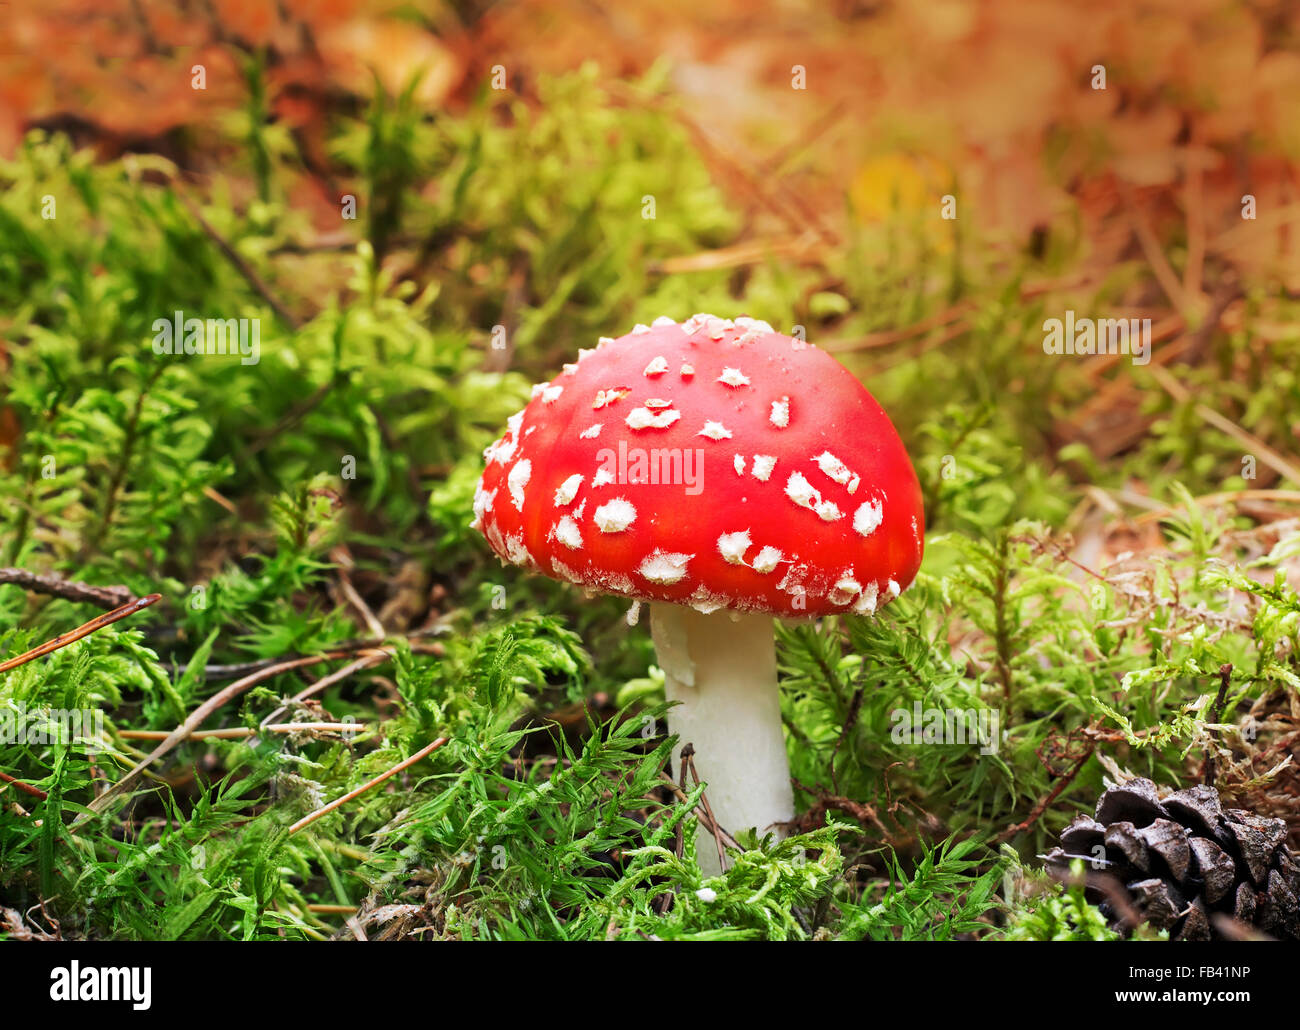 Mushroom a fly agaric grows in woods among moss and fallen leaves. Stock Photo